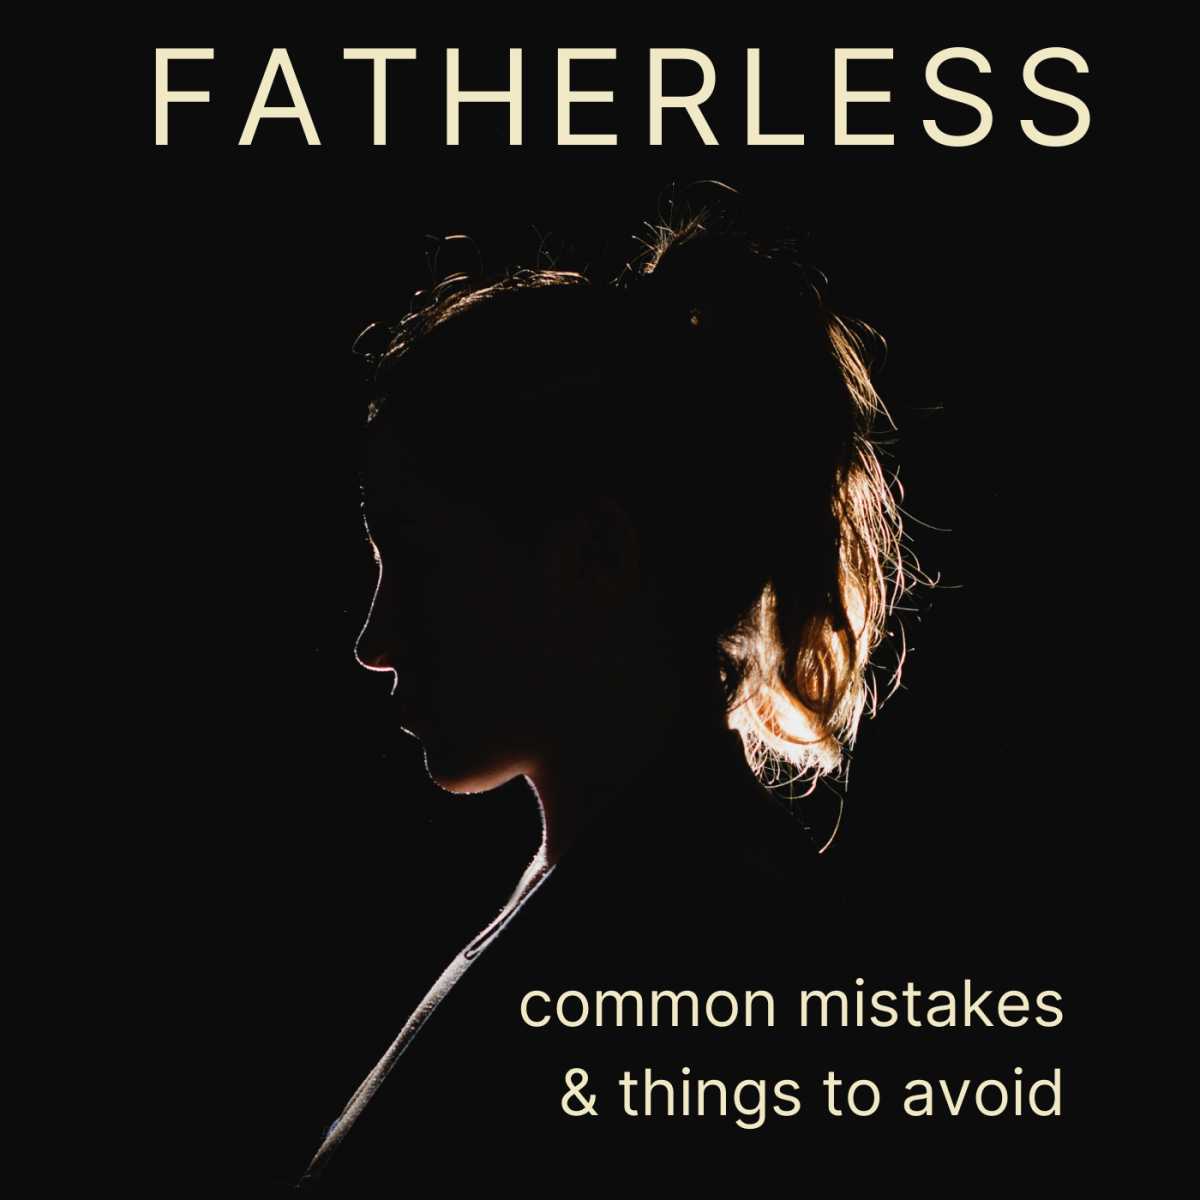 While fatherless sons may turn their anger outward, daughters with absent fathers are more apt to turn theirs inward. This can lead to depression, shame, and self-harm.